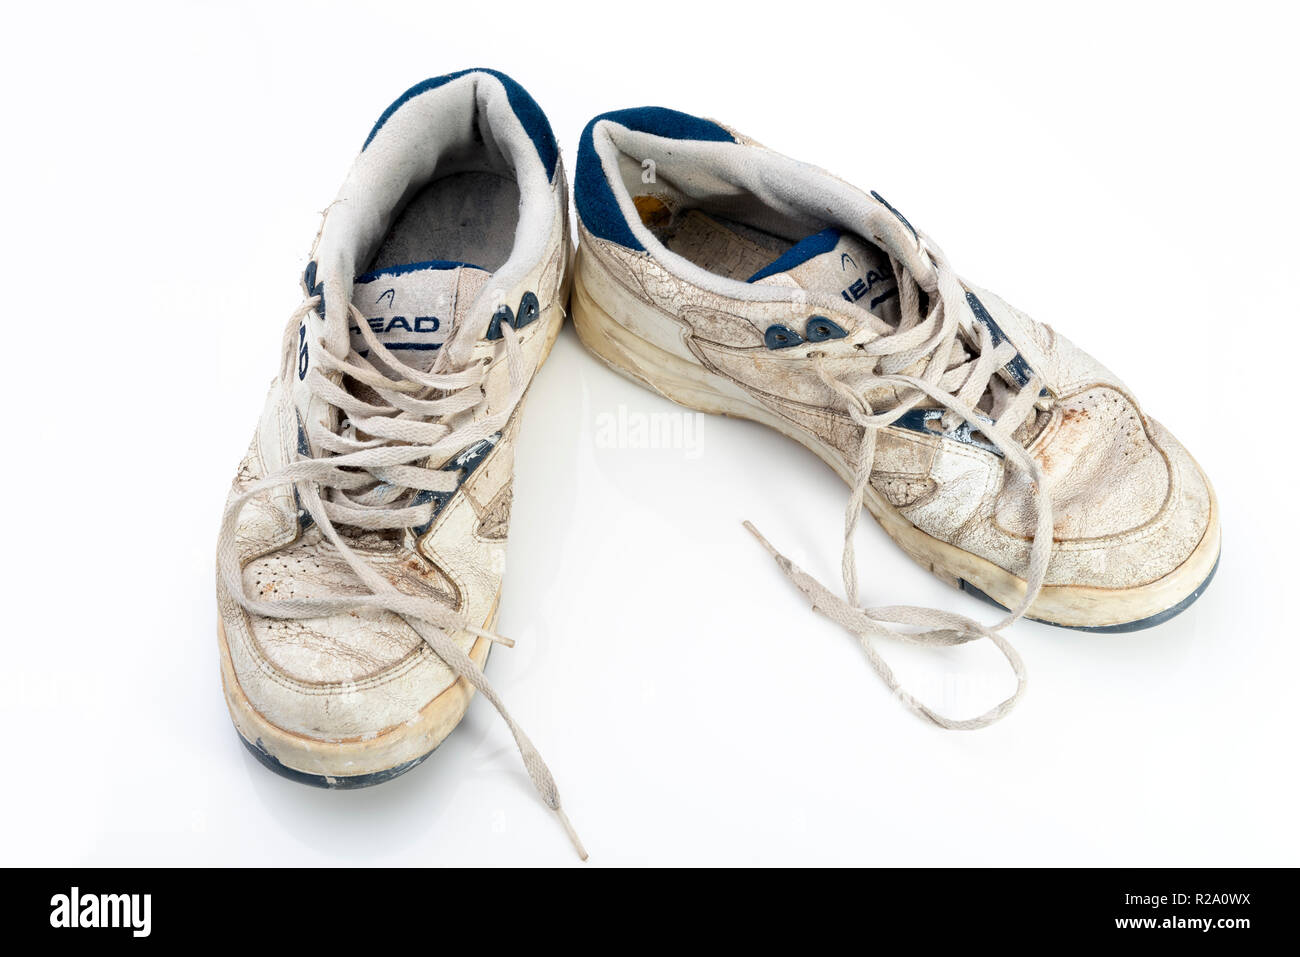 Pair of retro dirty old trainers. Worn and battered sneakers. Stock Photo